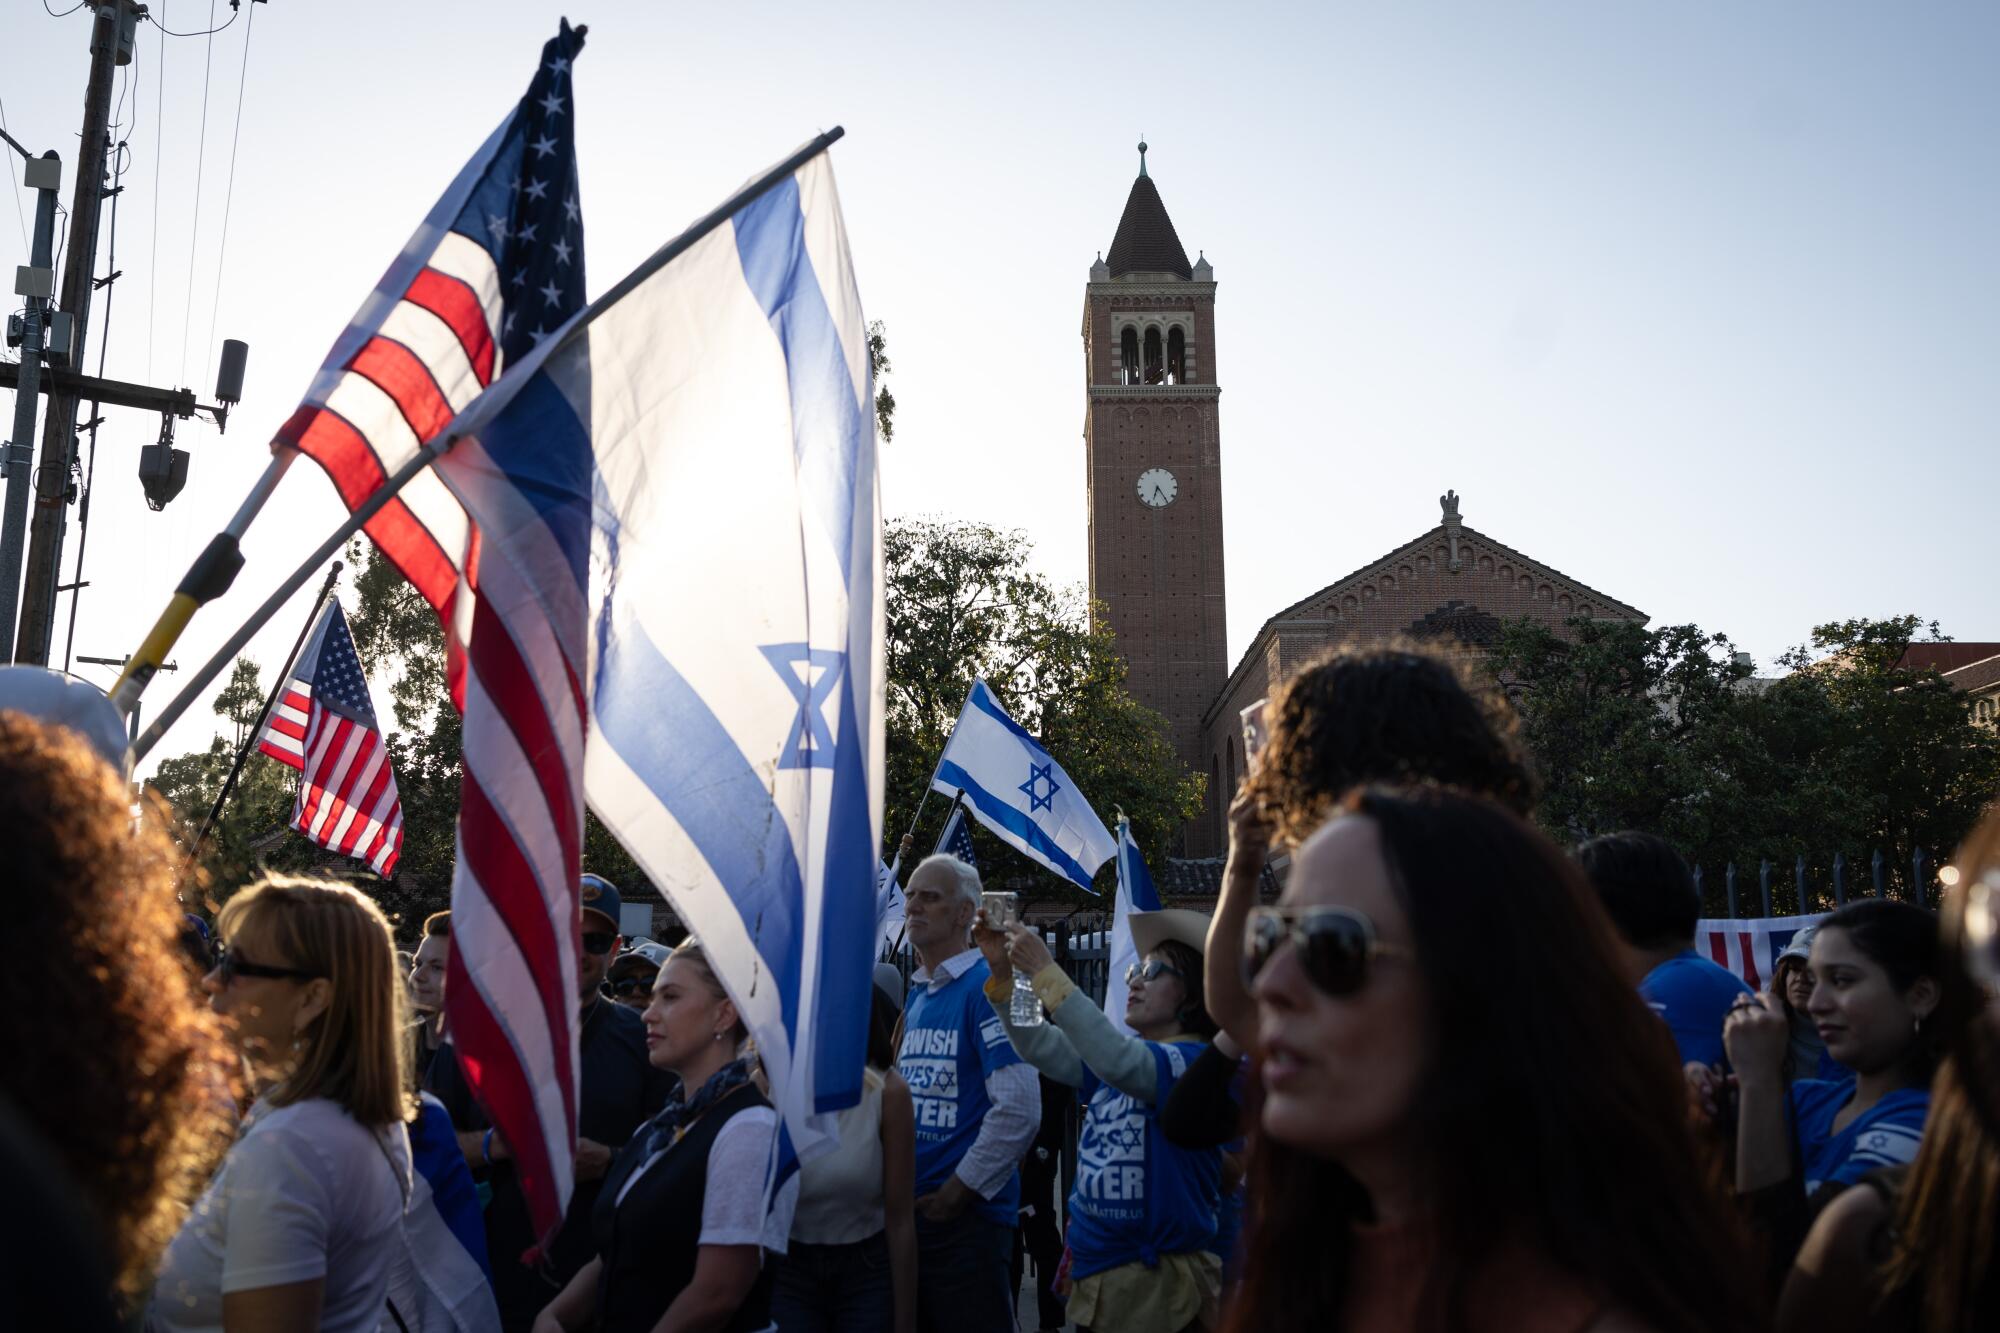  Pro-israeli supporters gather at the "United for Israel" rally at the University of Southern 